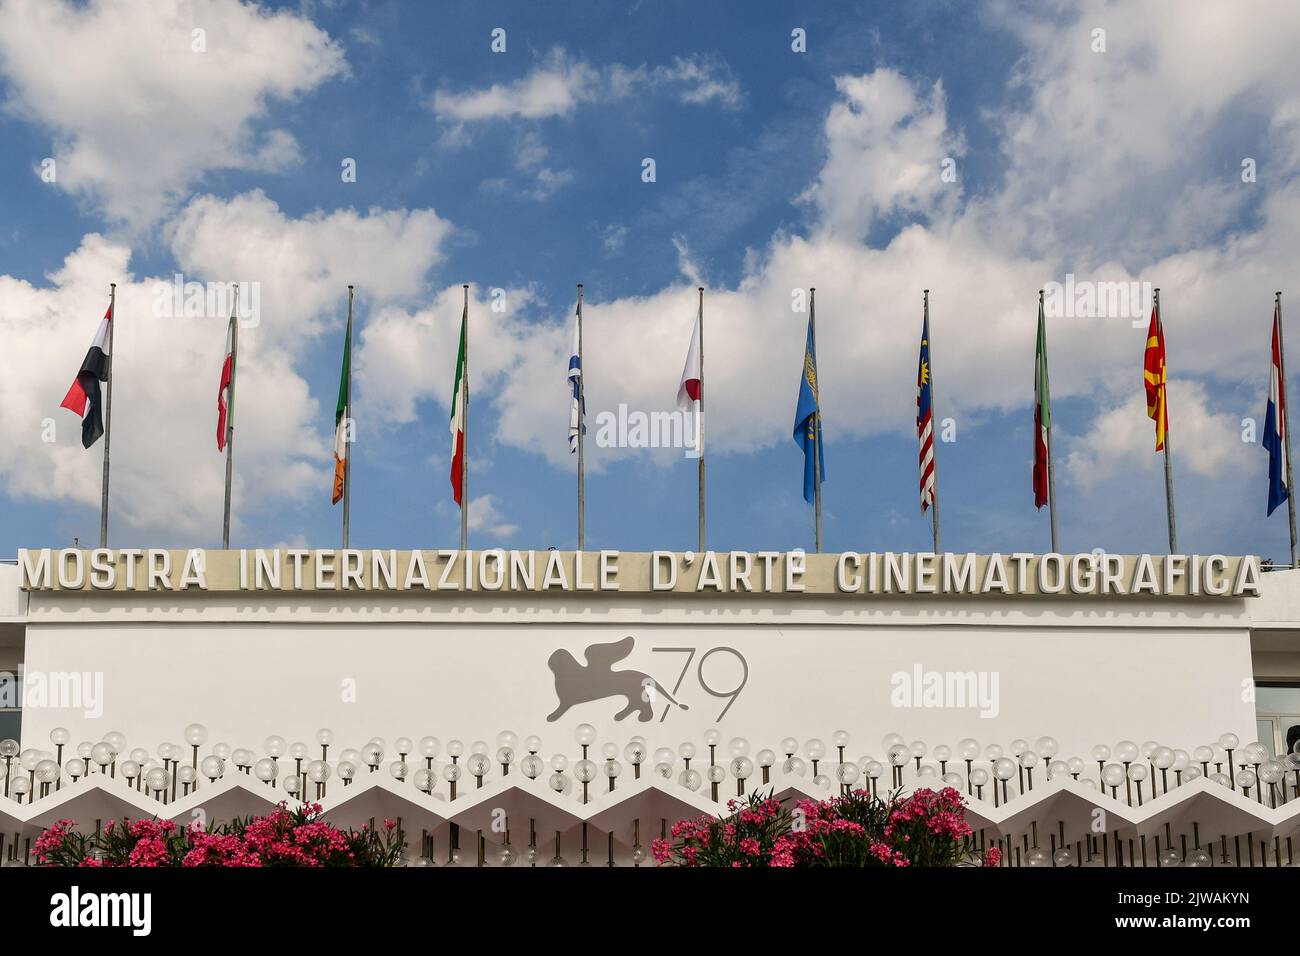 Sign and flags on the facade of the Cinema Palace, seat of the 79th Venice International Film Festival, Lido di Venezia, Veneto, Italy Stock Photo